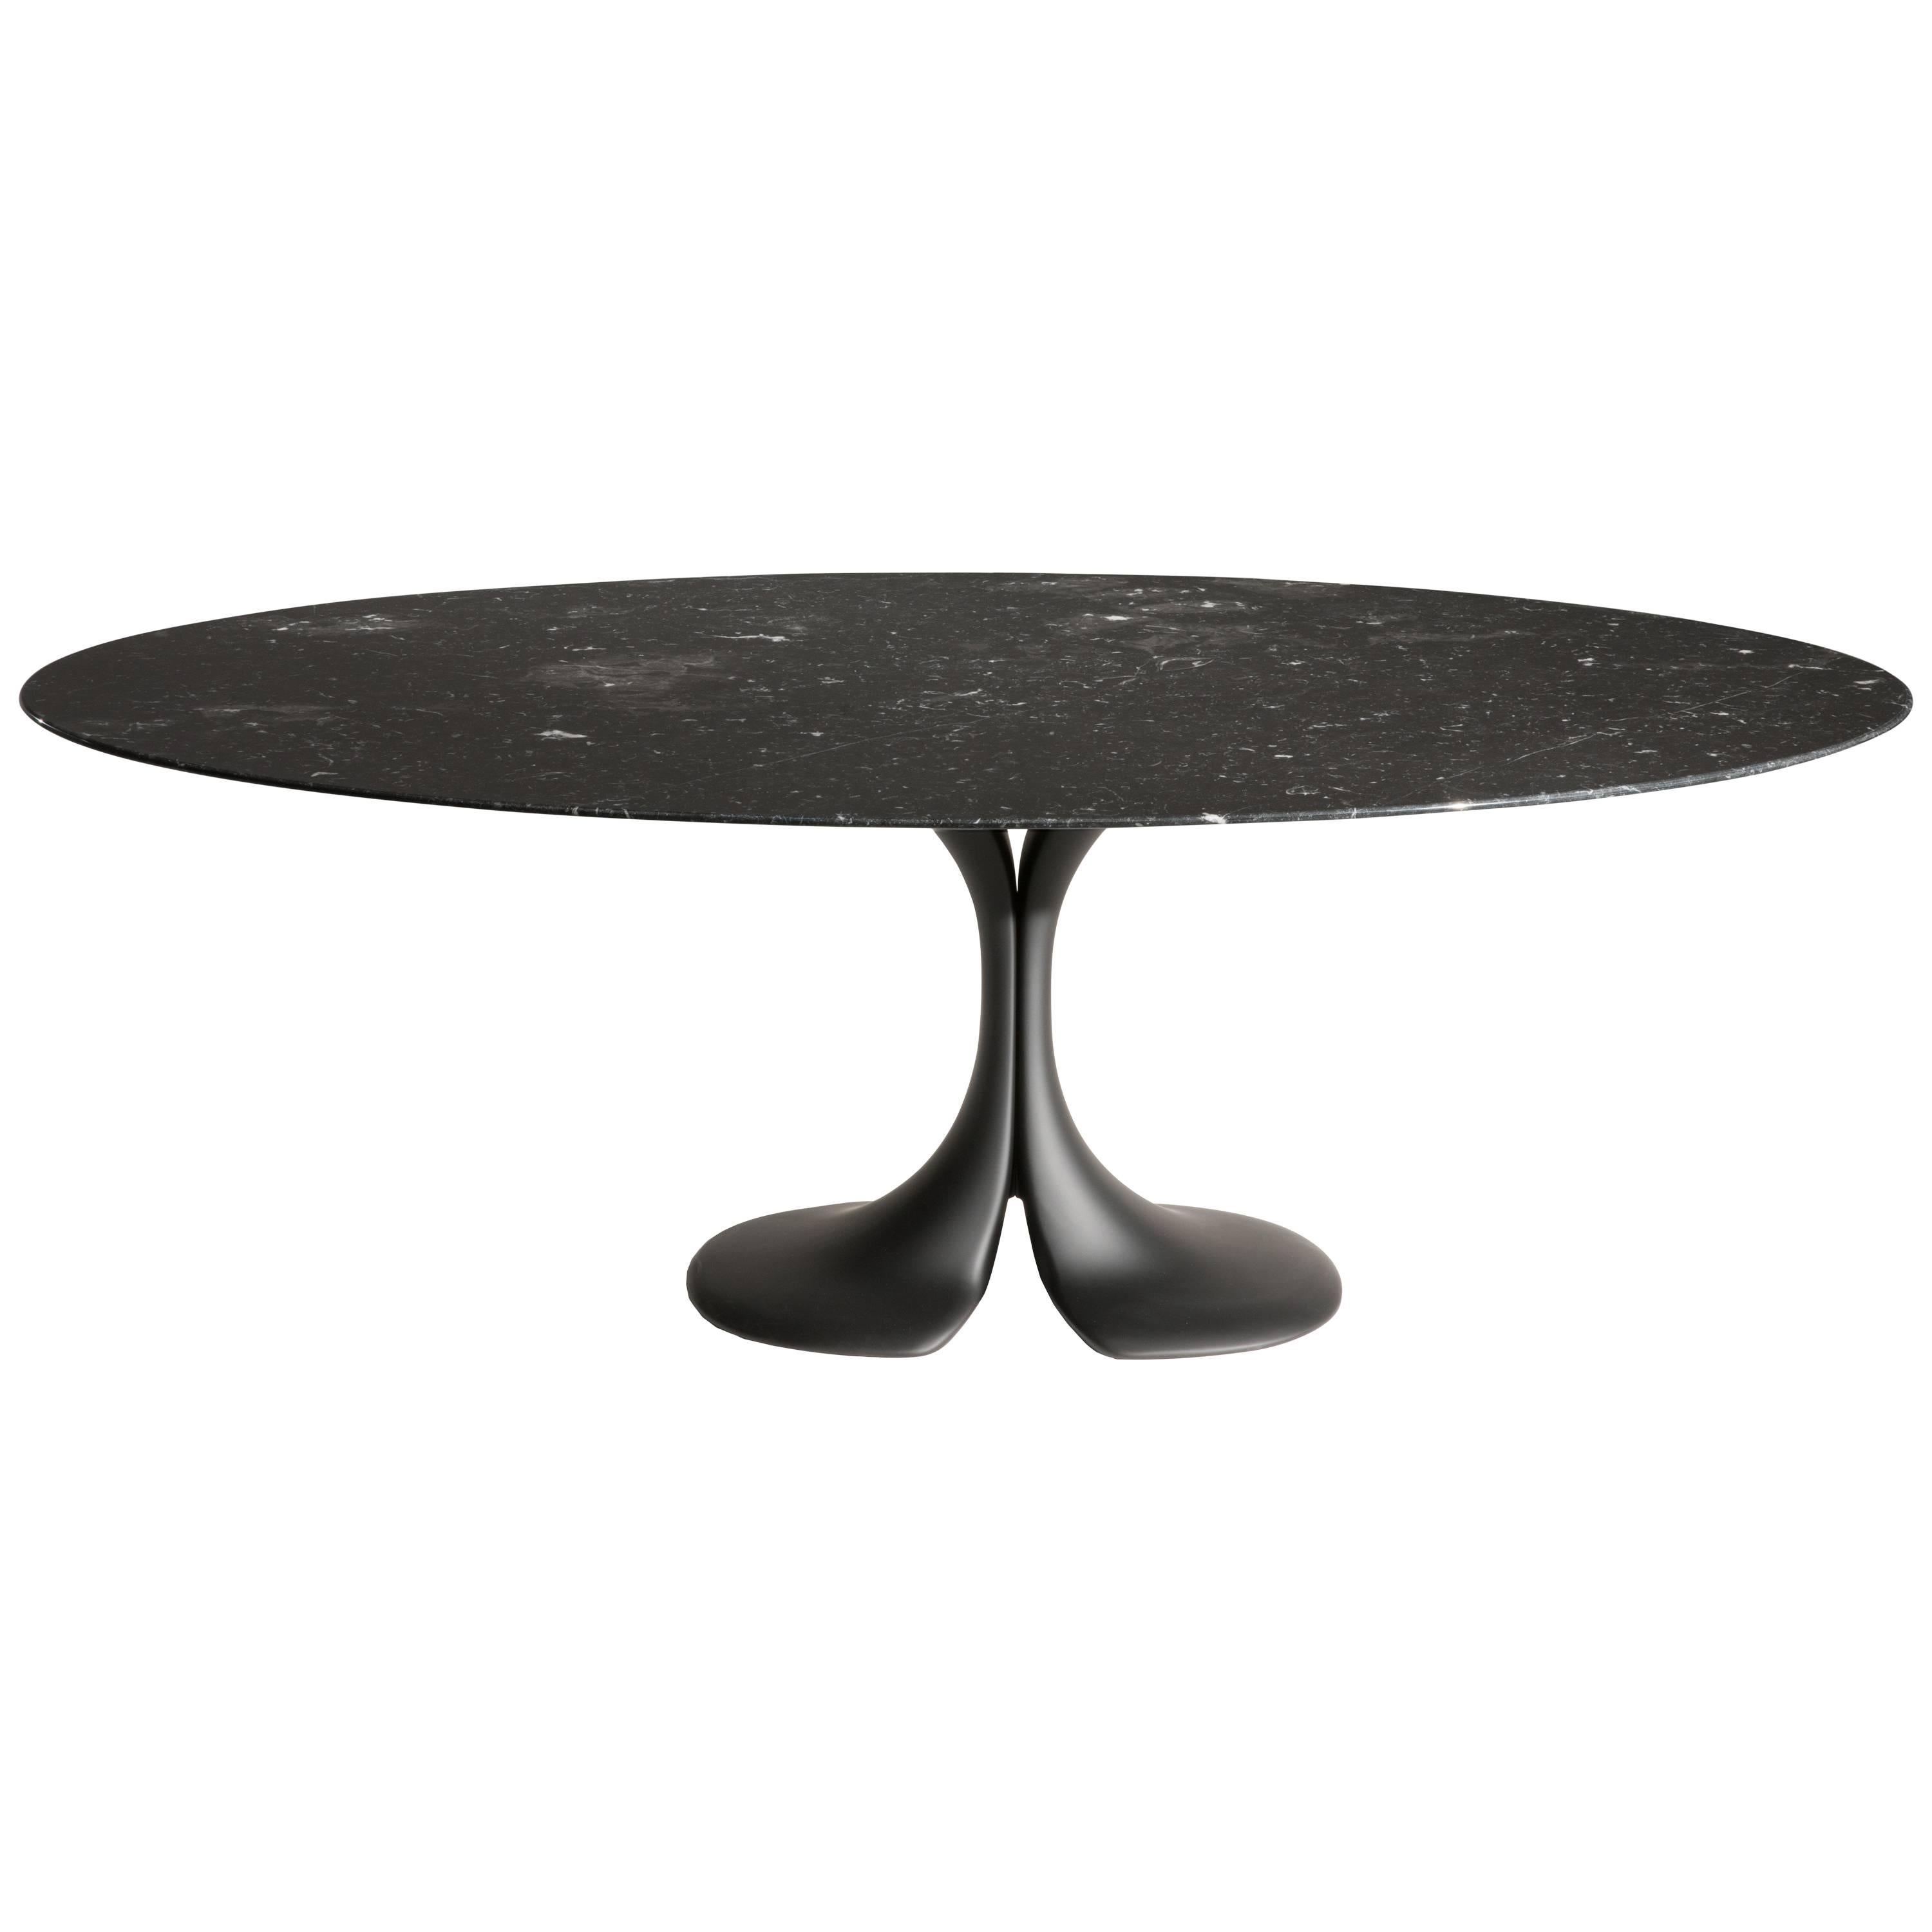 Didymos Oval Table with Black Marble Top by Antonia Astori for Driade